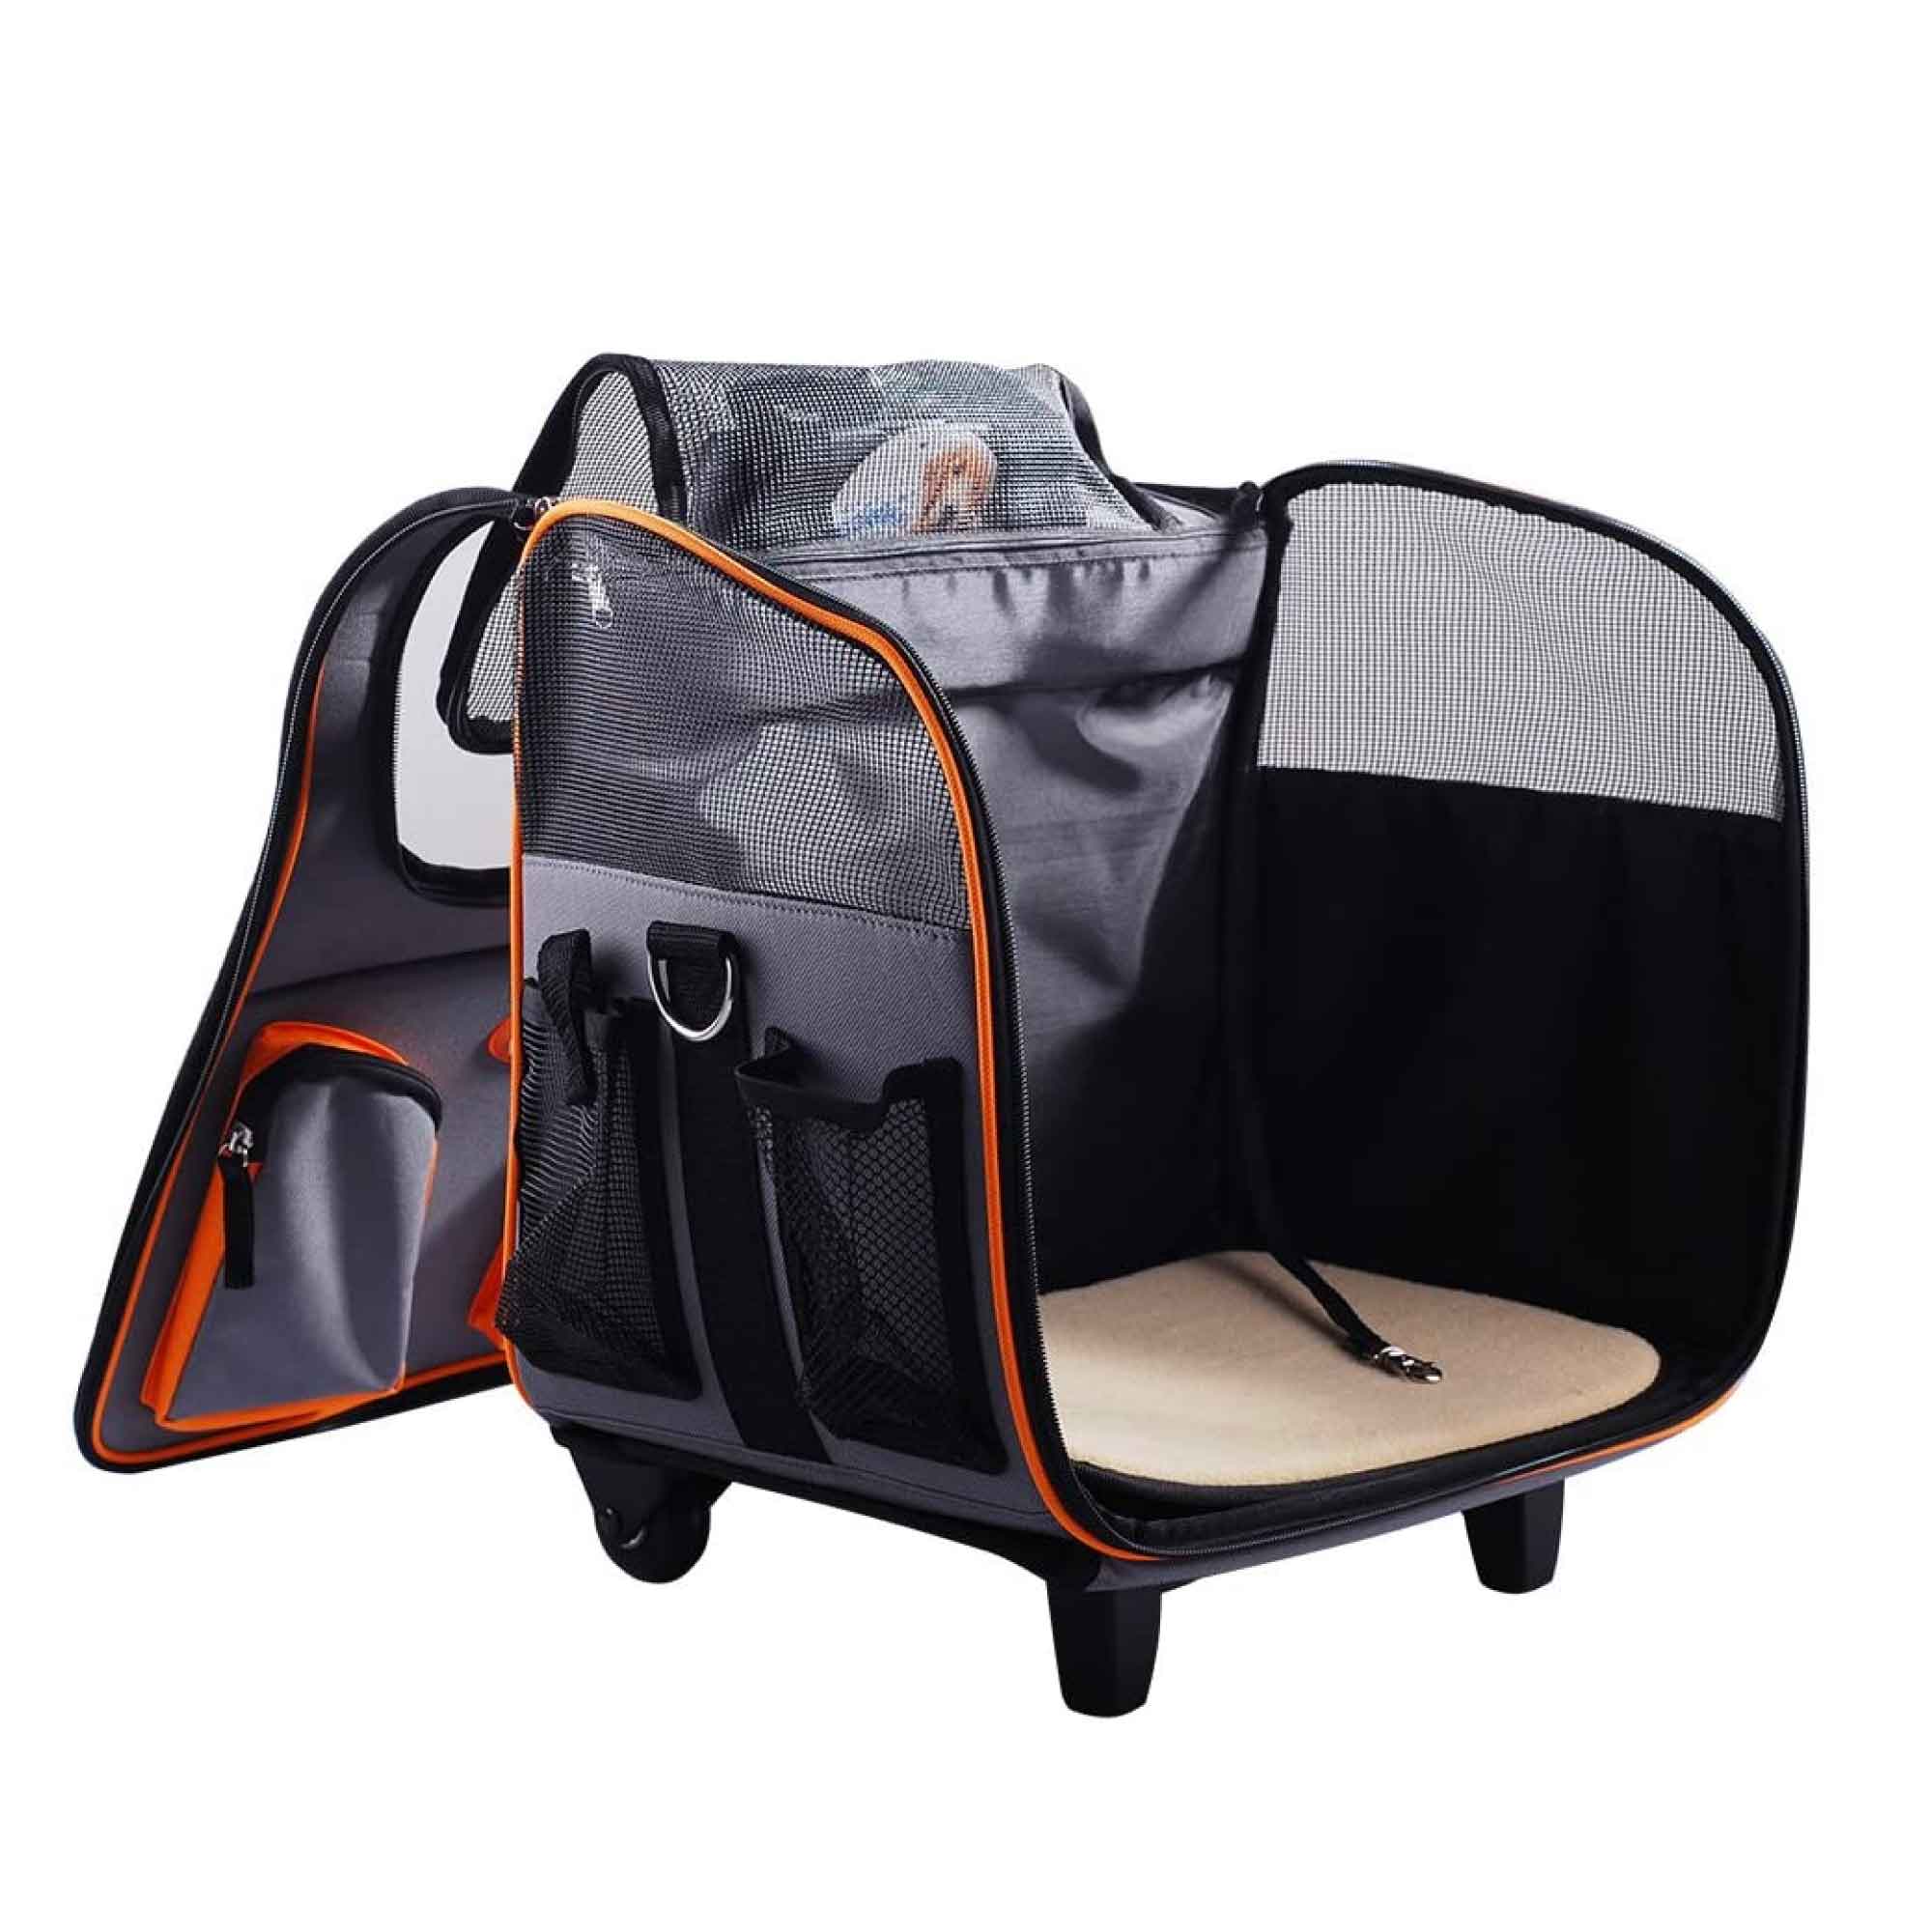 Convenient Pet Trolley: Portable, Foldable Dog Cat Carrier Cart with Wheels for Travel - Orange